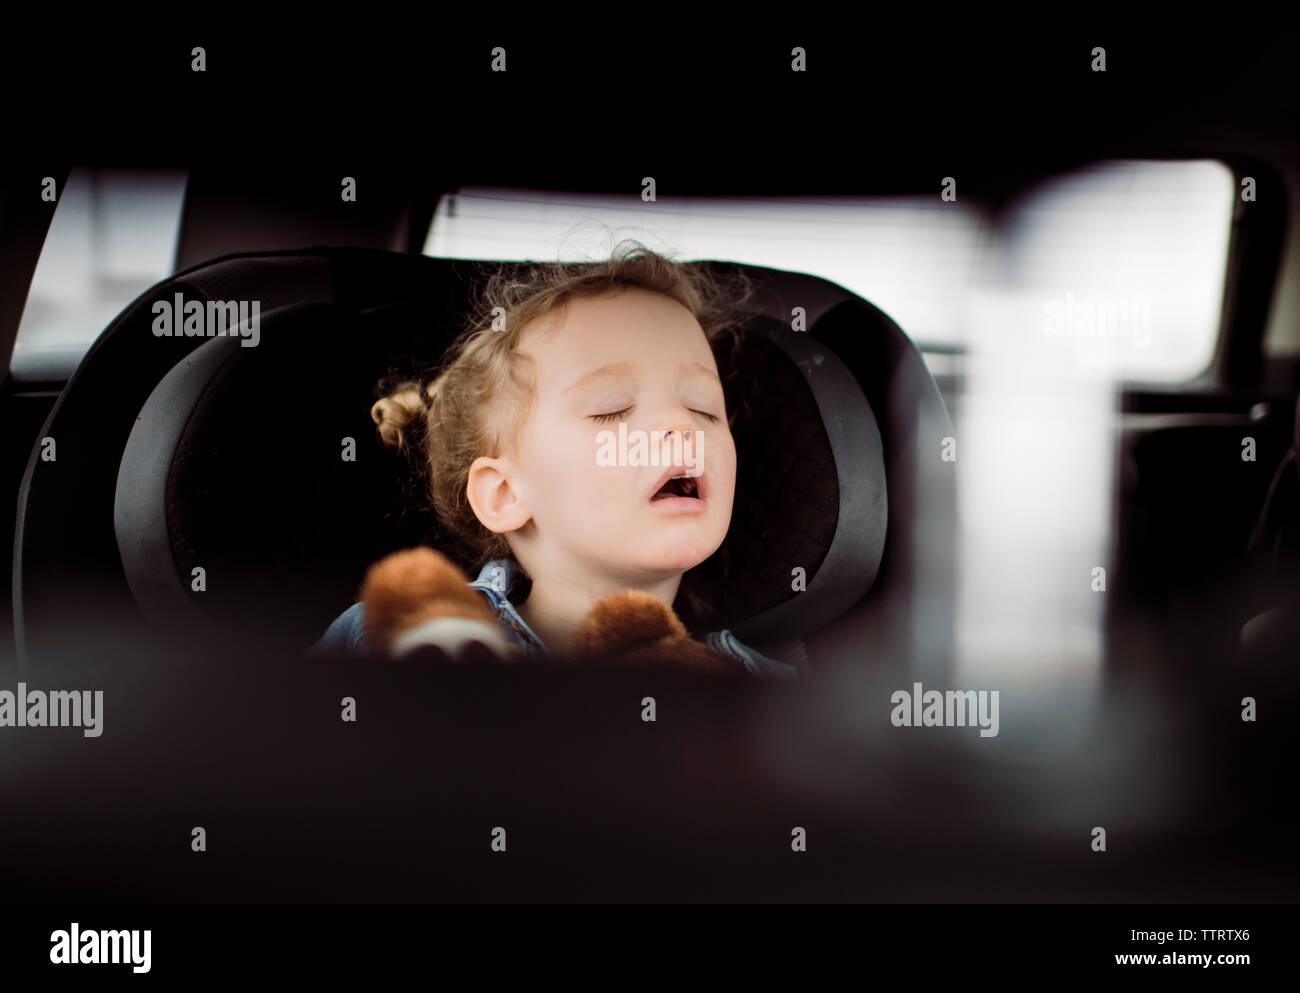 Cute girl with mouth open sleeping in car seen through vehicle seat Stock Photo